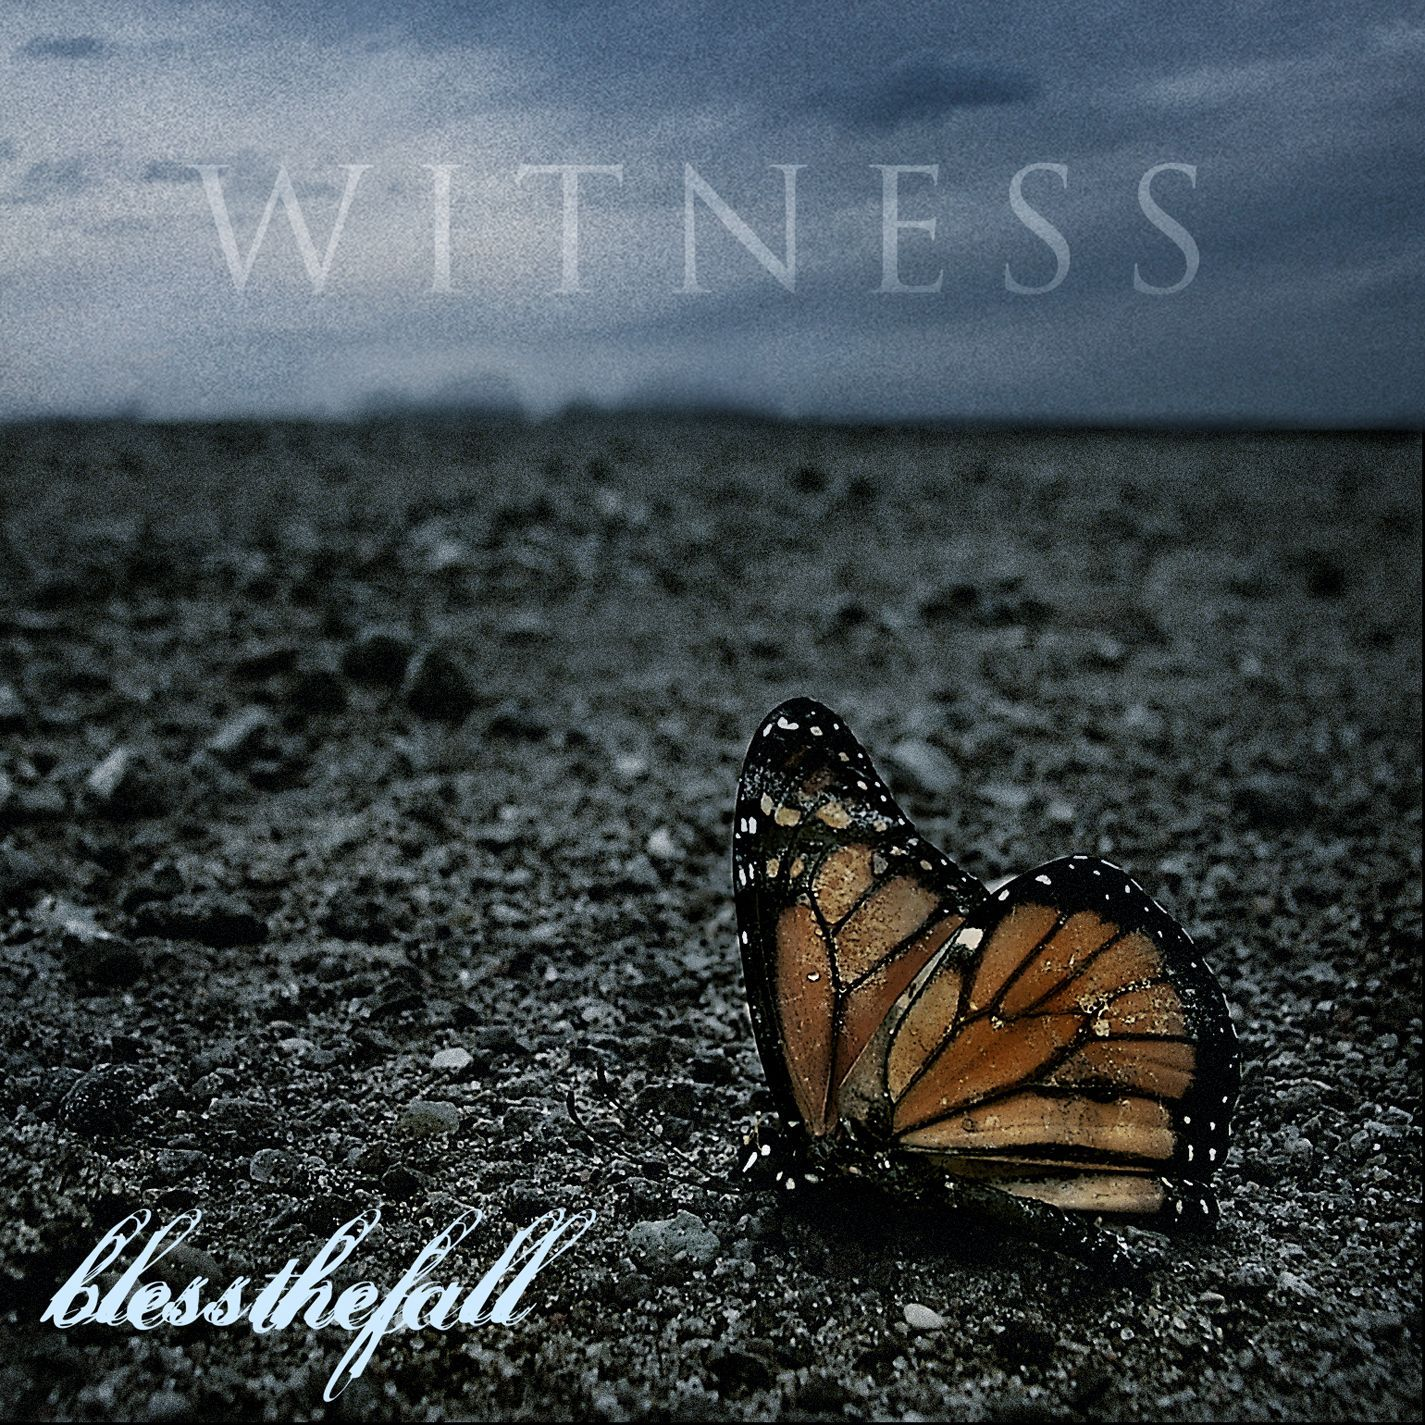 Blessthefall - Witness (2009) FLAC Download